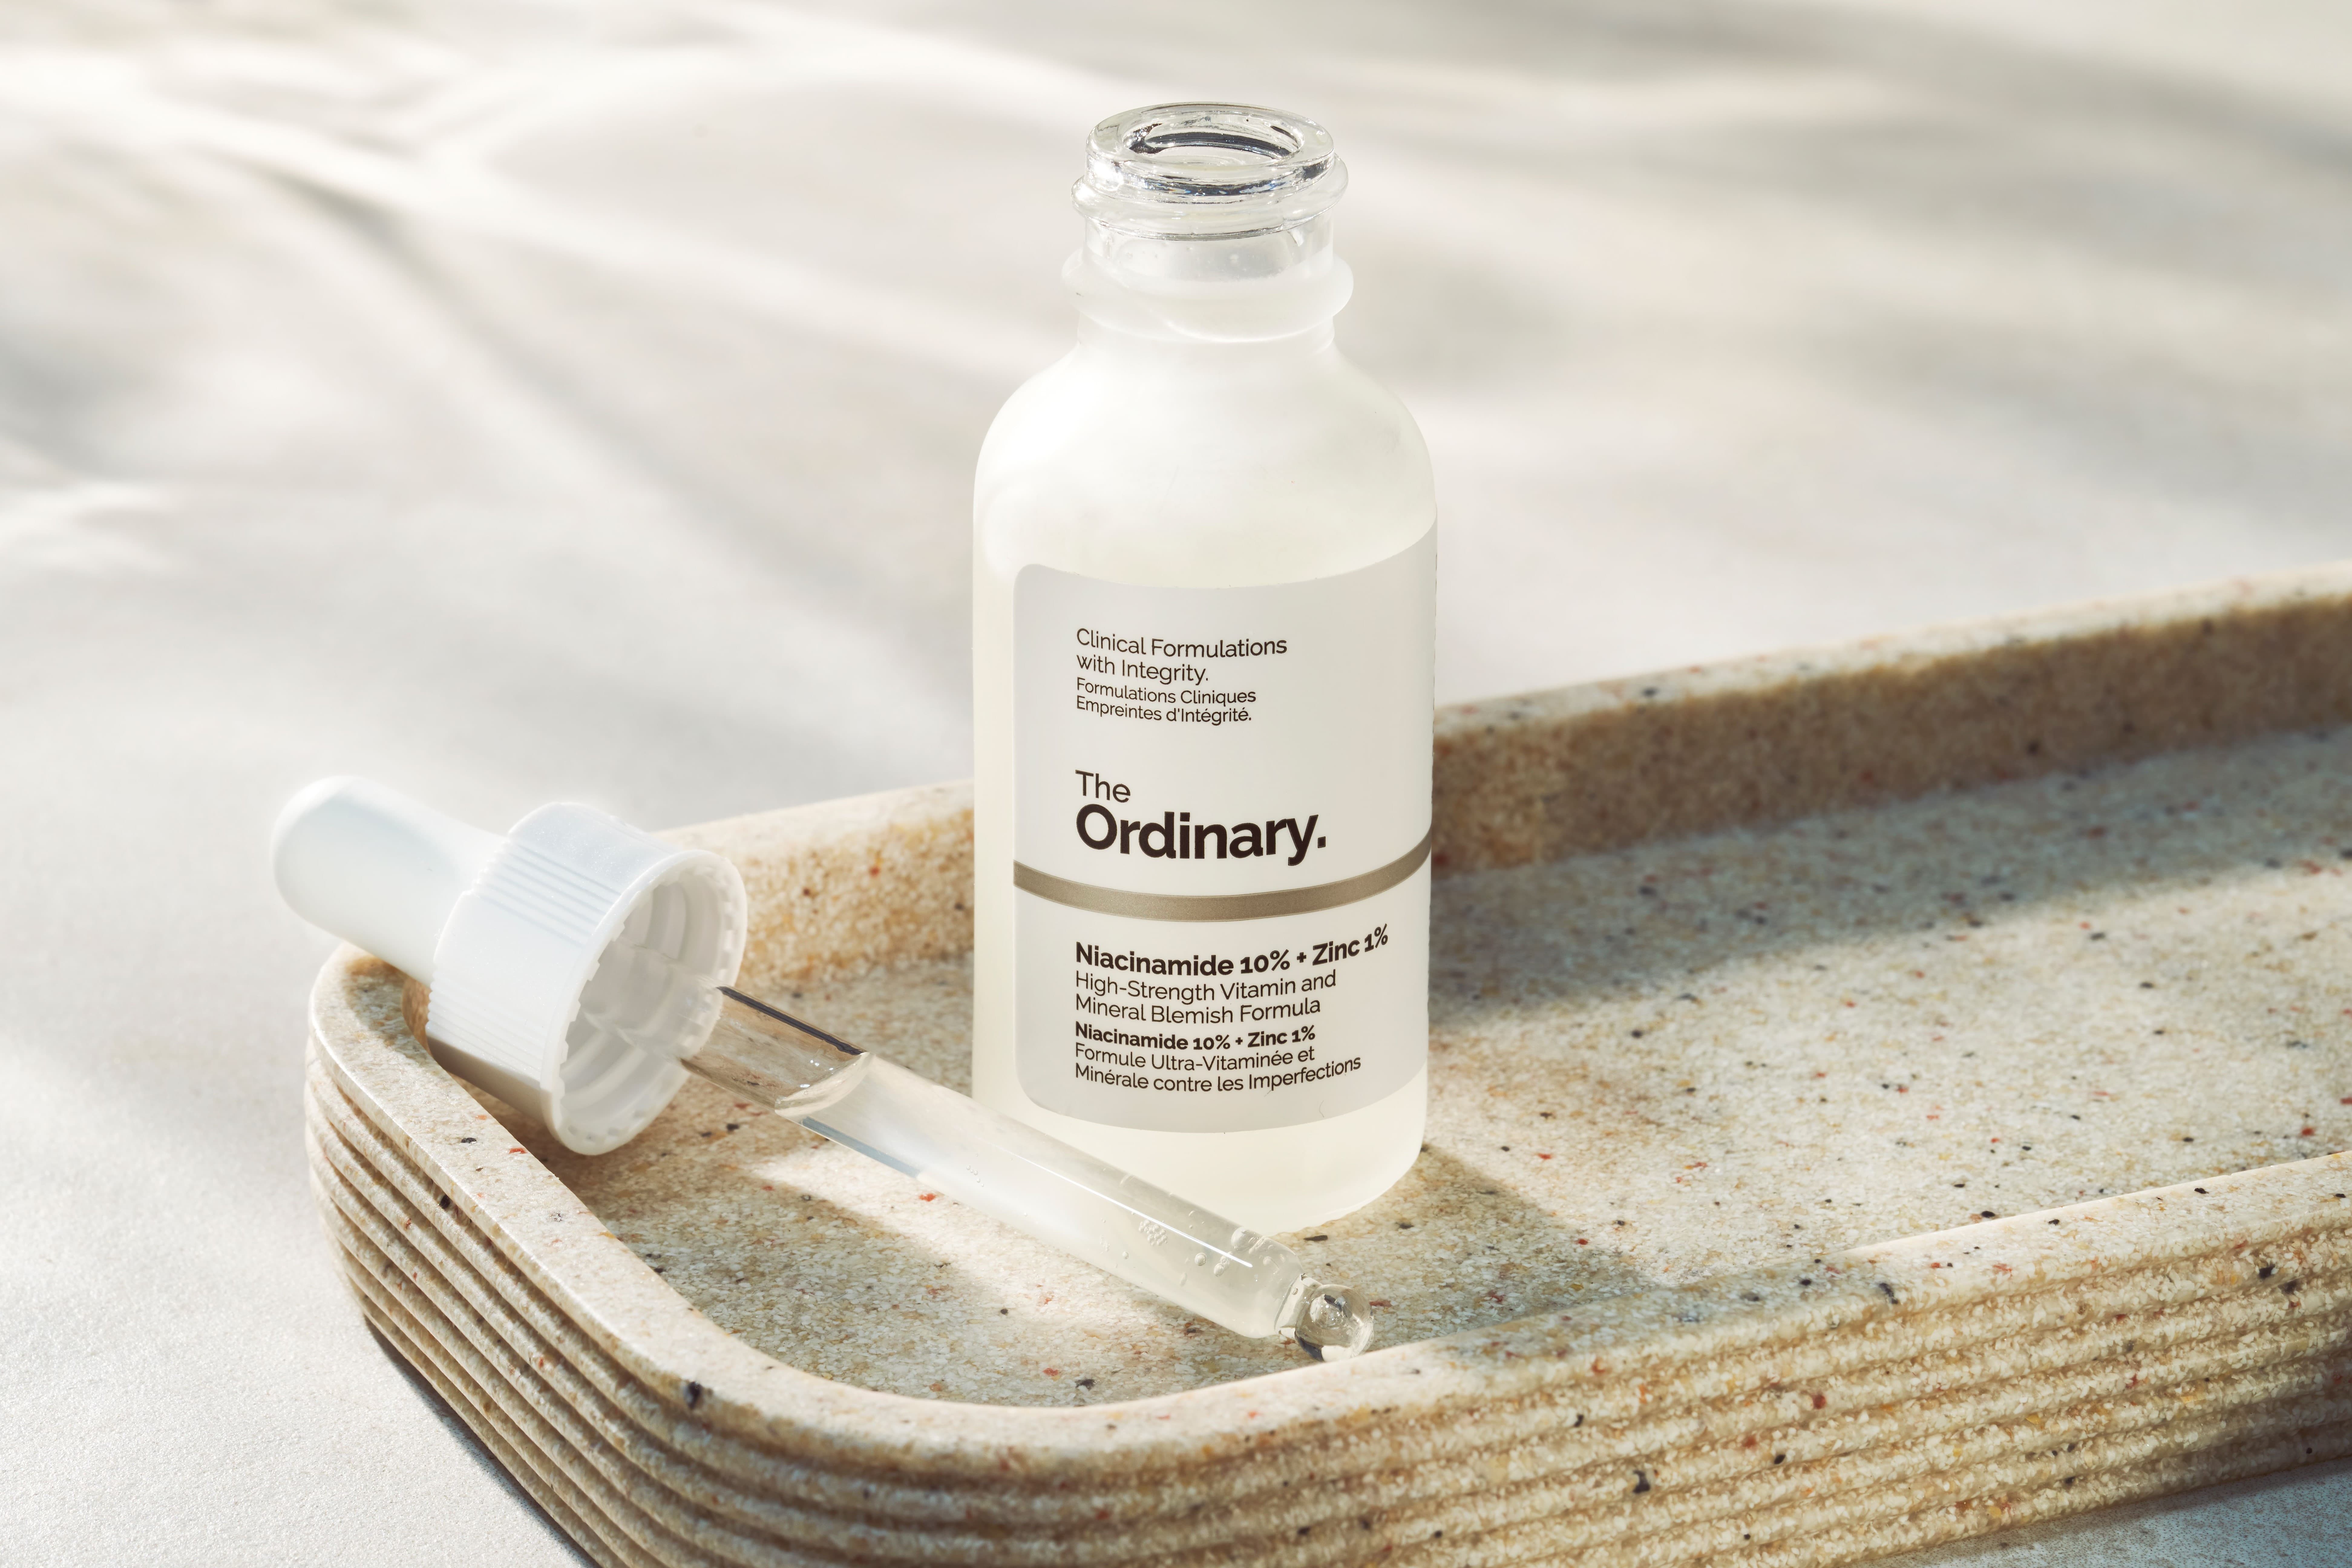 Space NK Reviews The Ordinary's Bestselling Serums